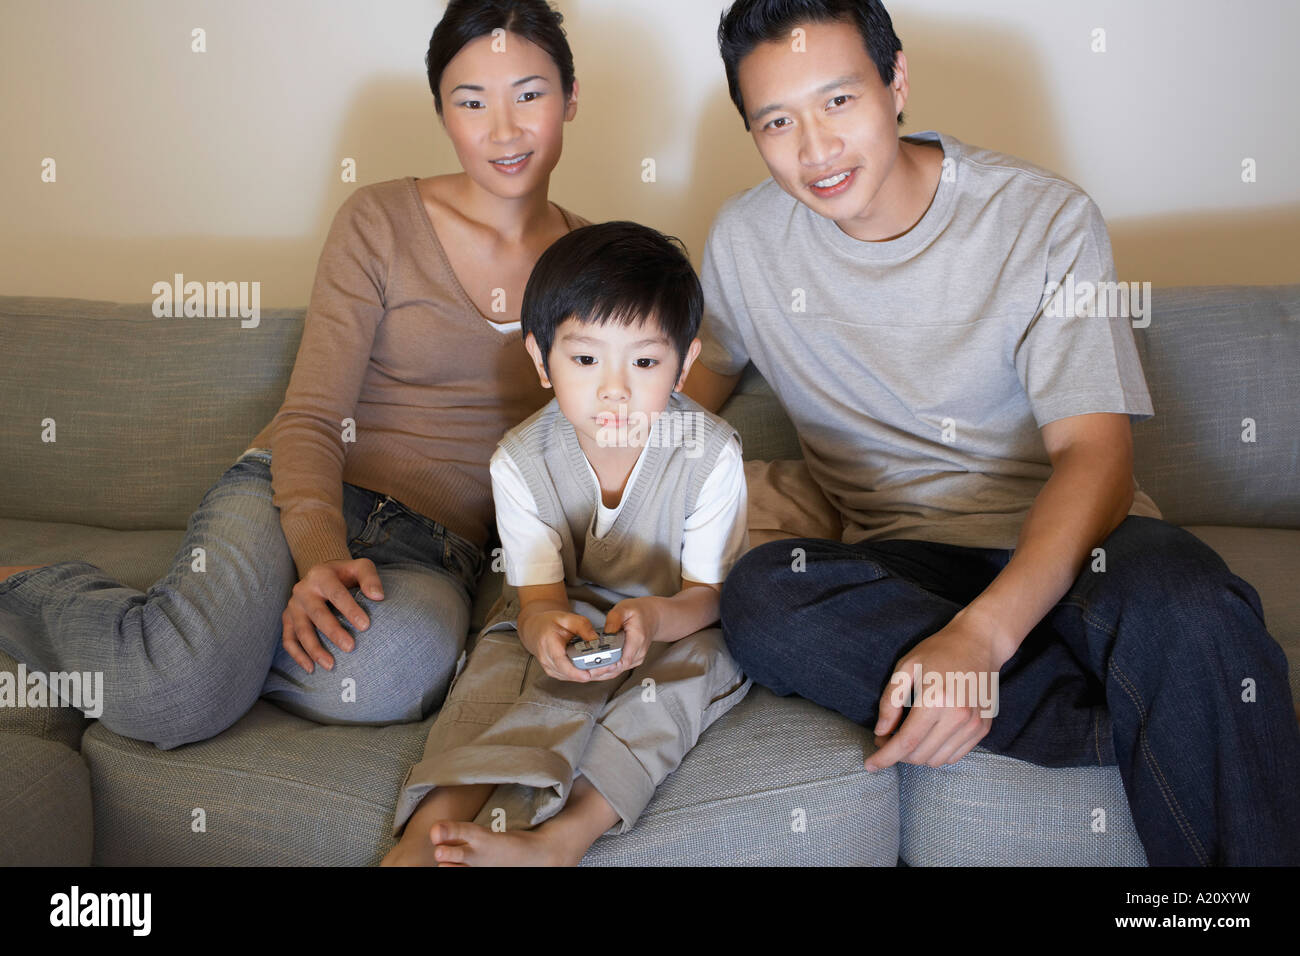 Couple sitting on sofa, Watching Television while son is using remote control Stock Photo